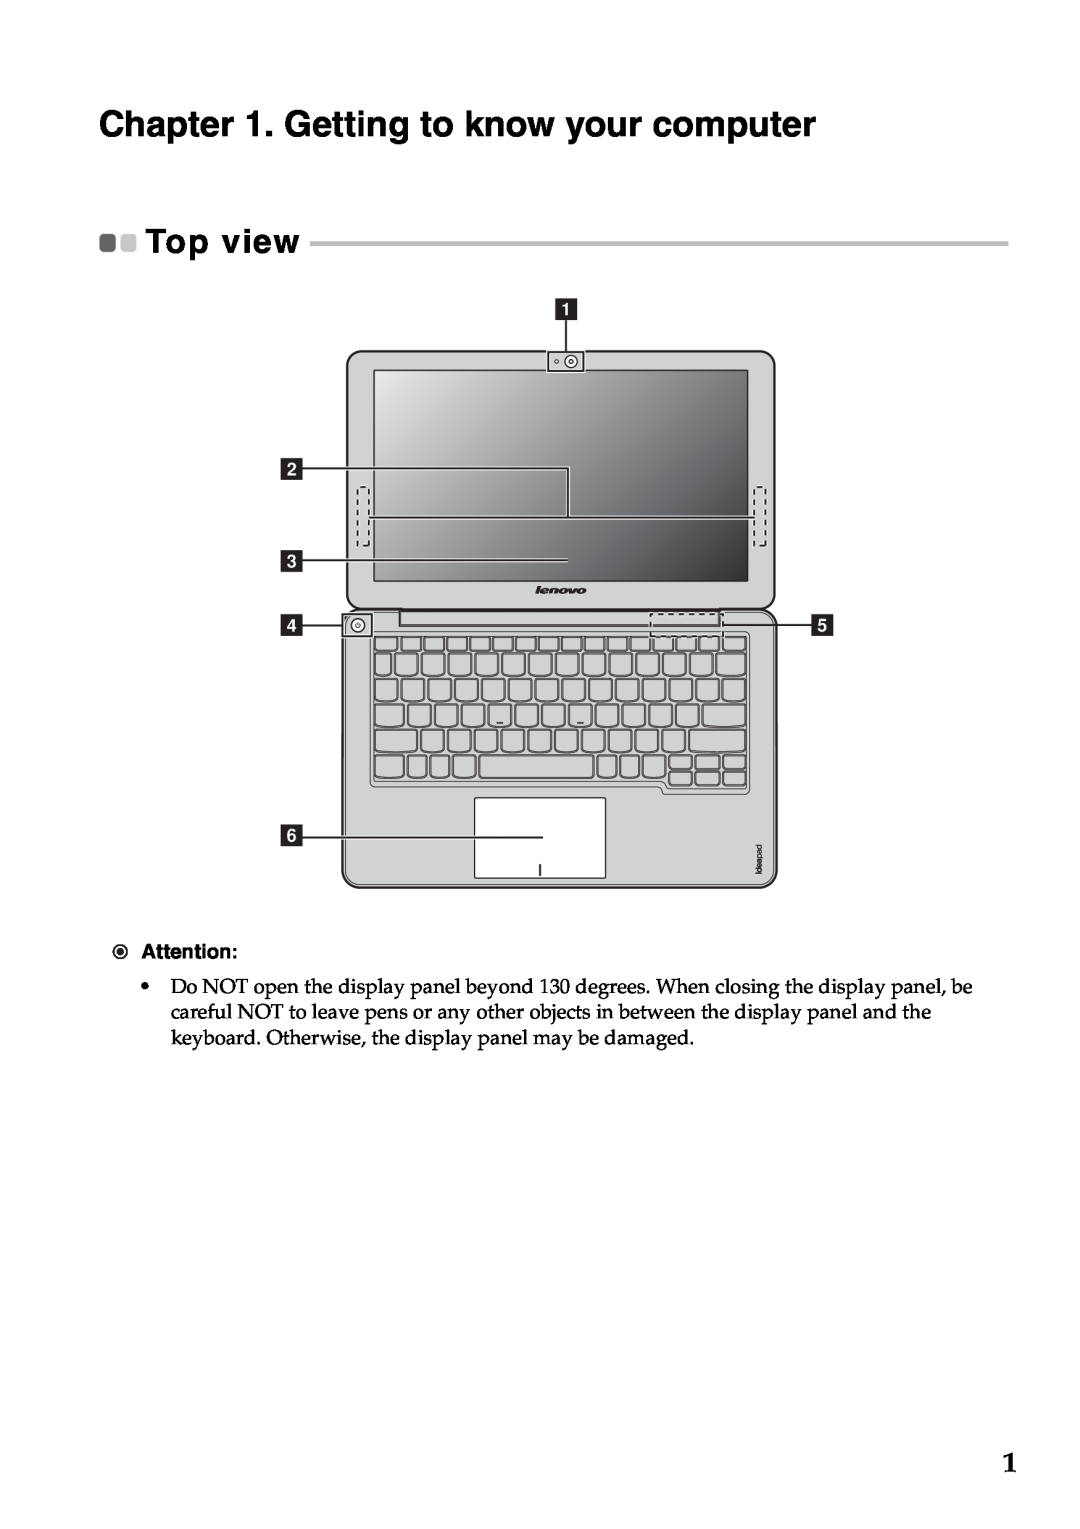 Lenovo S200, S206 manual Getting to know your computer, Top view, b c d f 